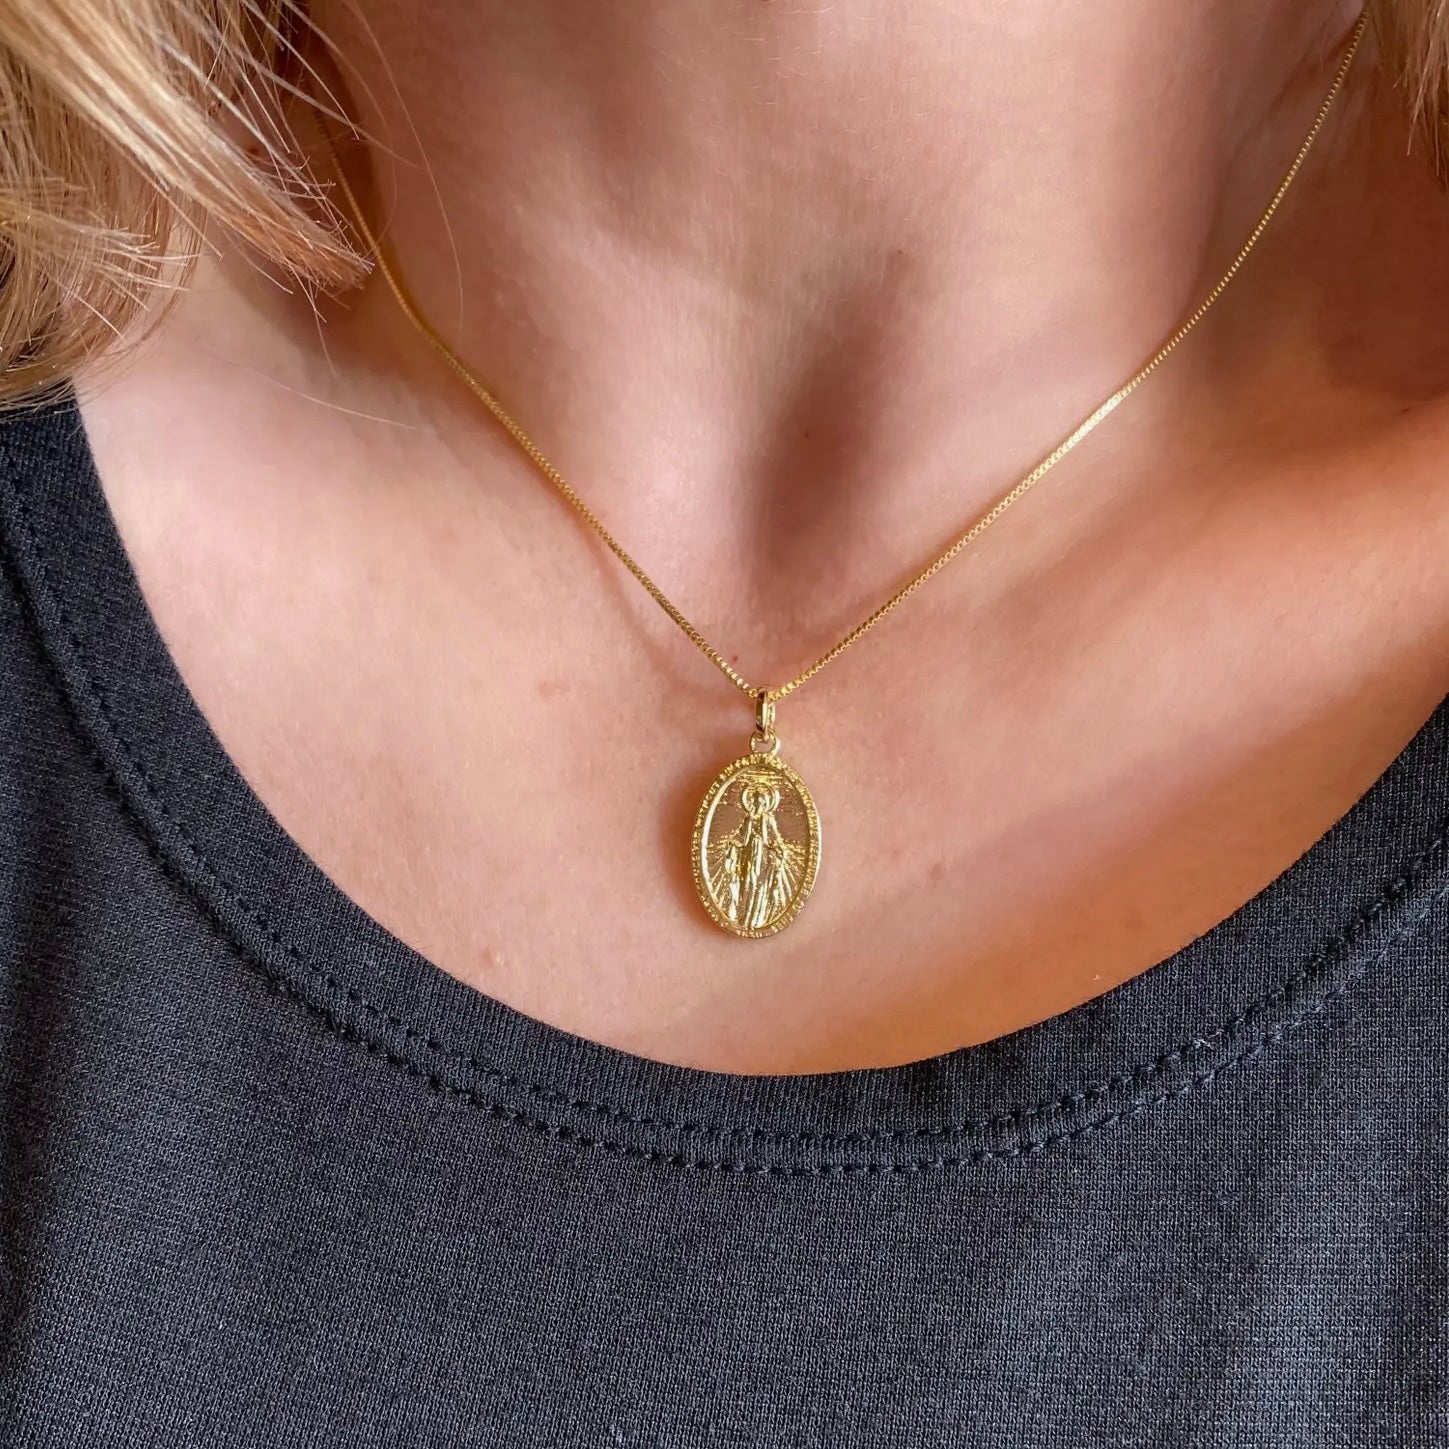 miraculous-medal-necklace-gold-filled-box-chain